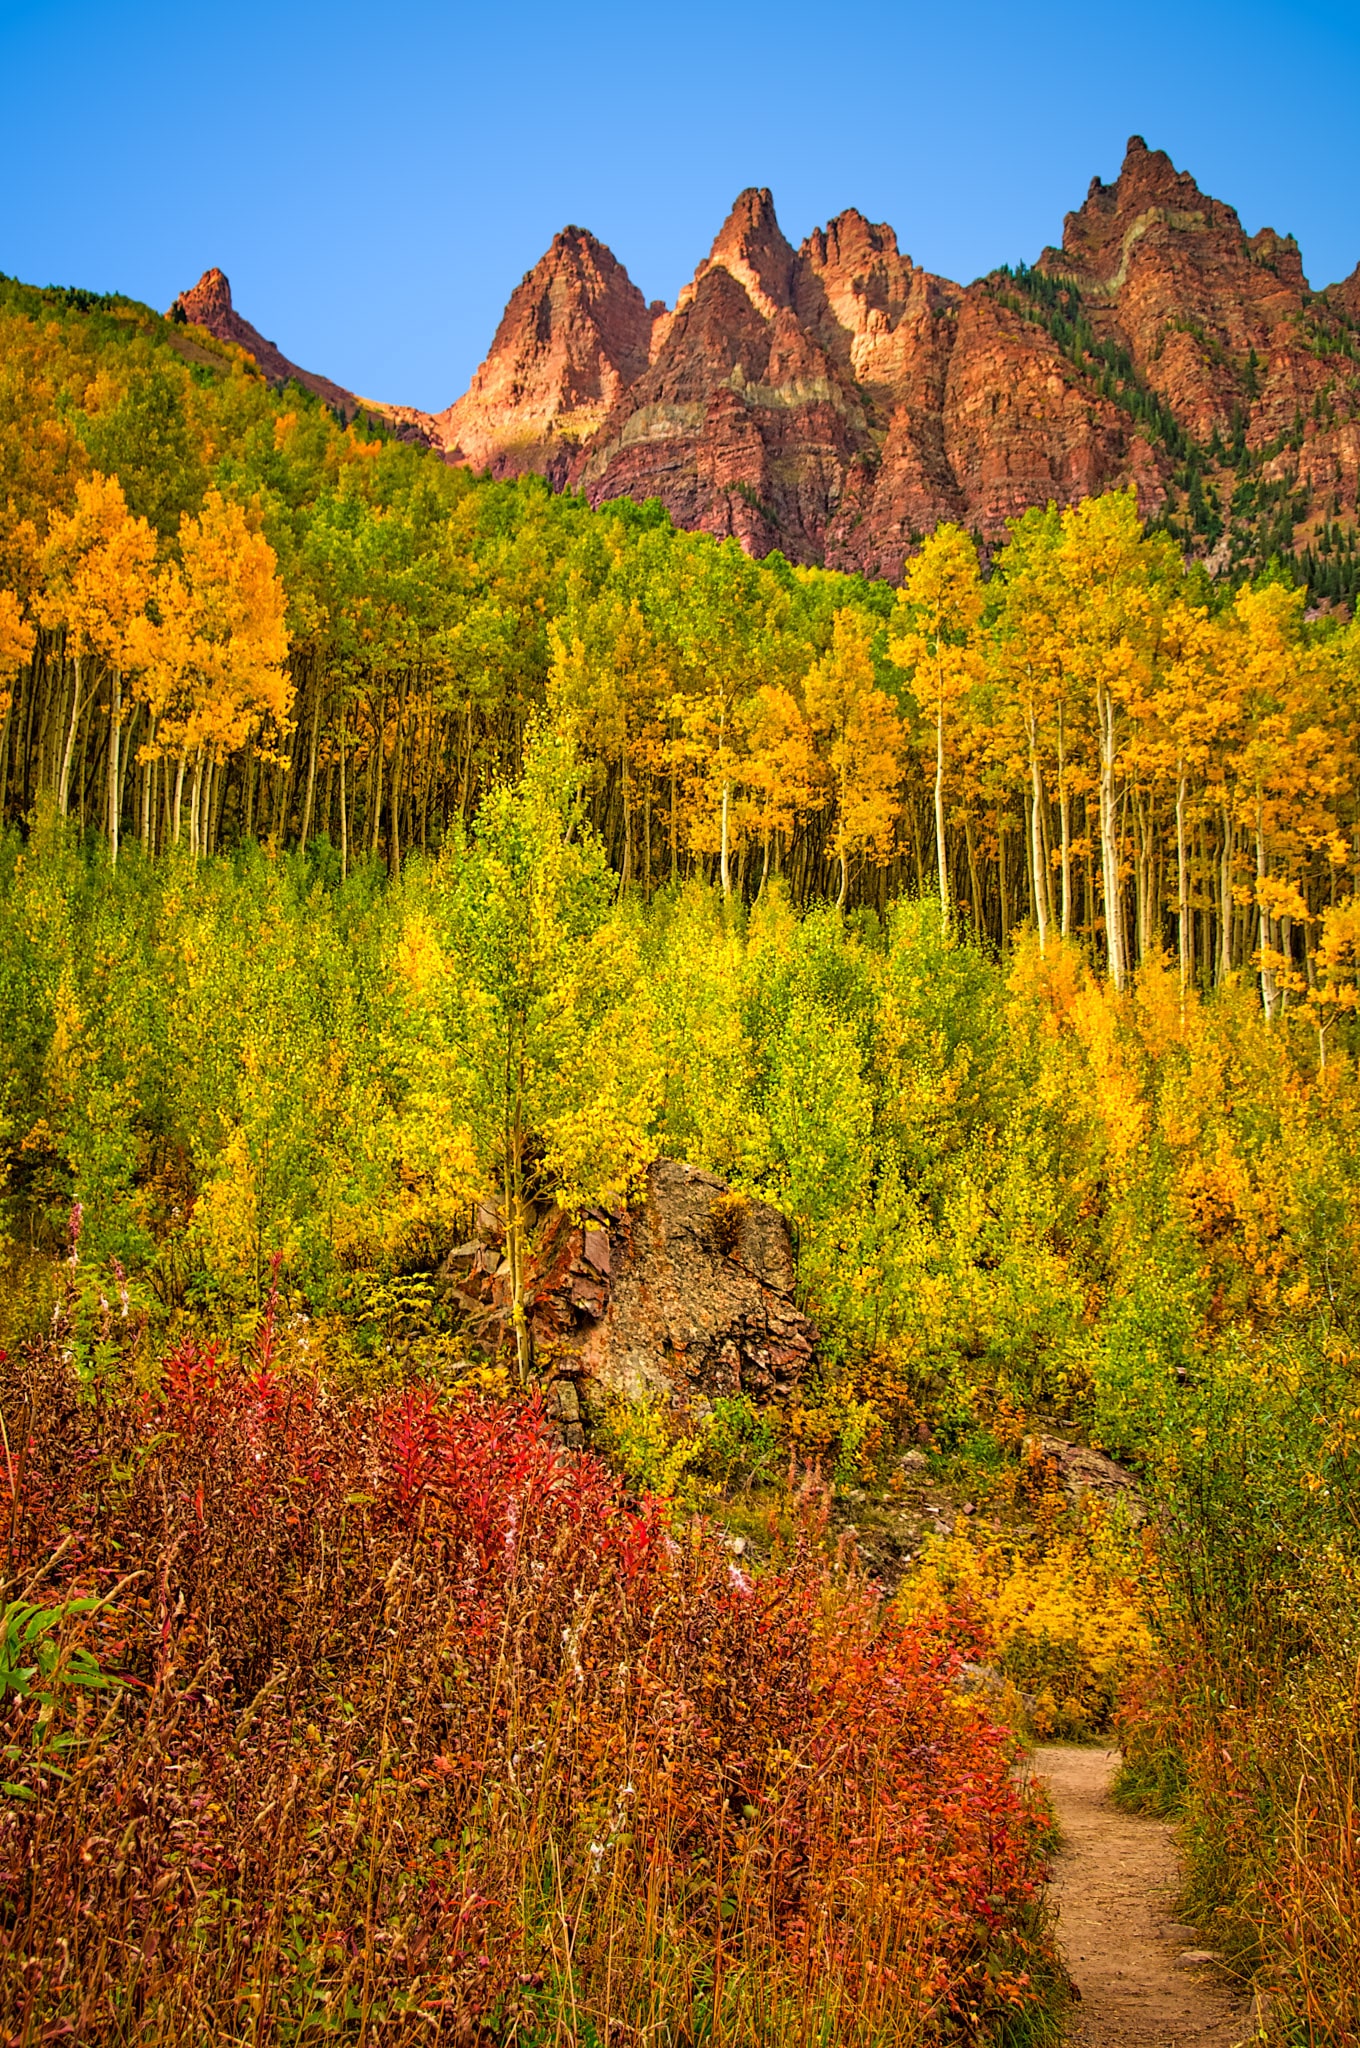 A view along the trail in the Maroon Bells Recreation Area showcases turning aspens and fireweed.